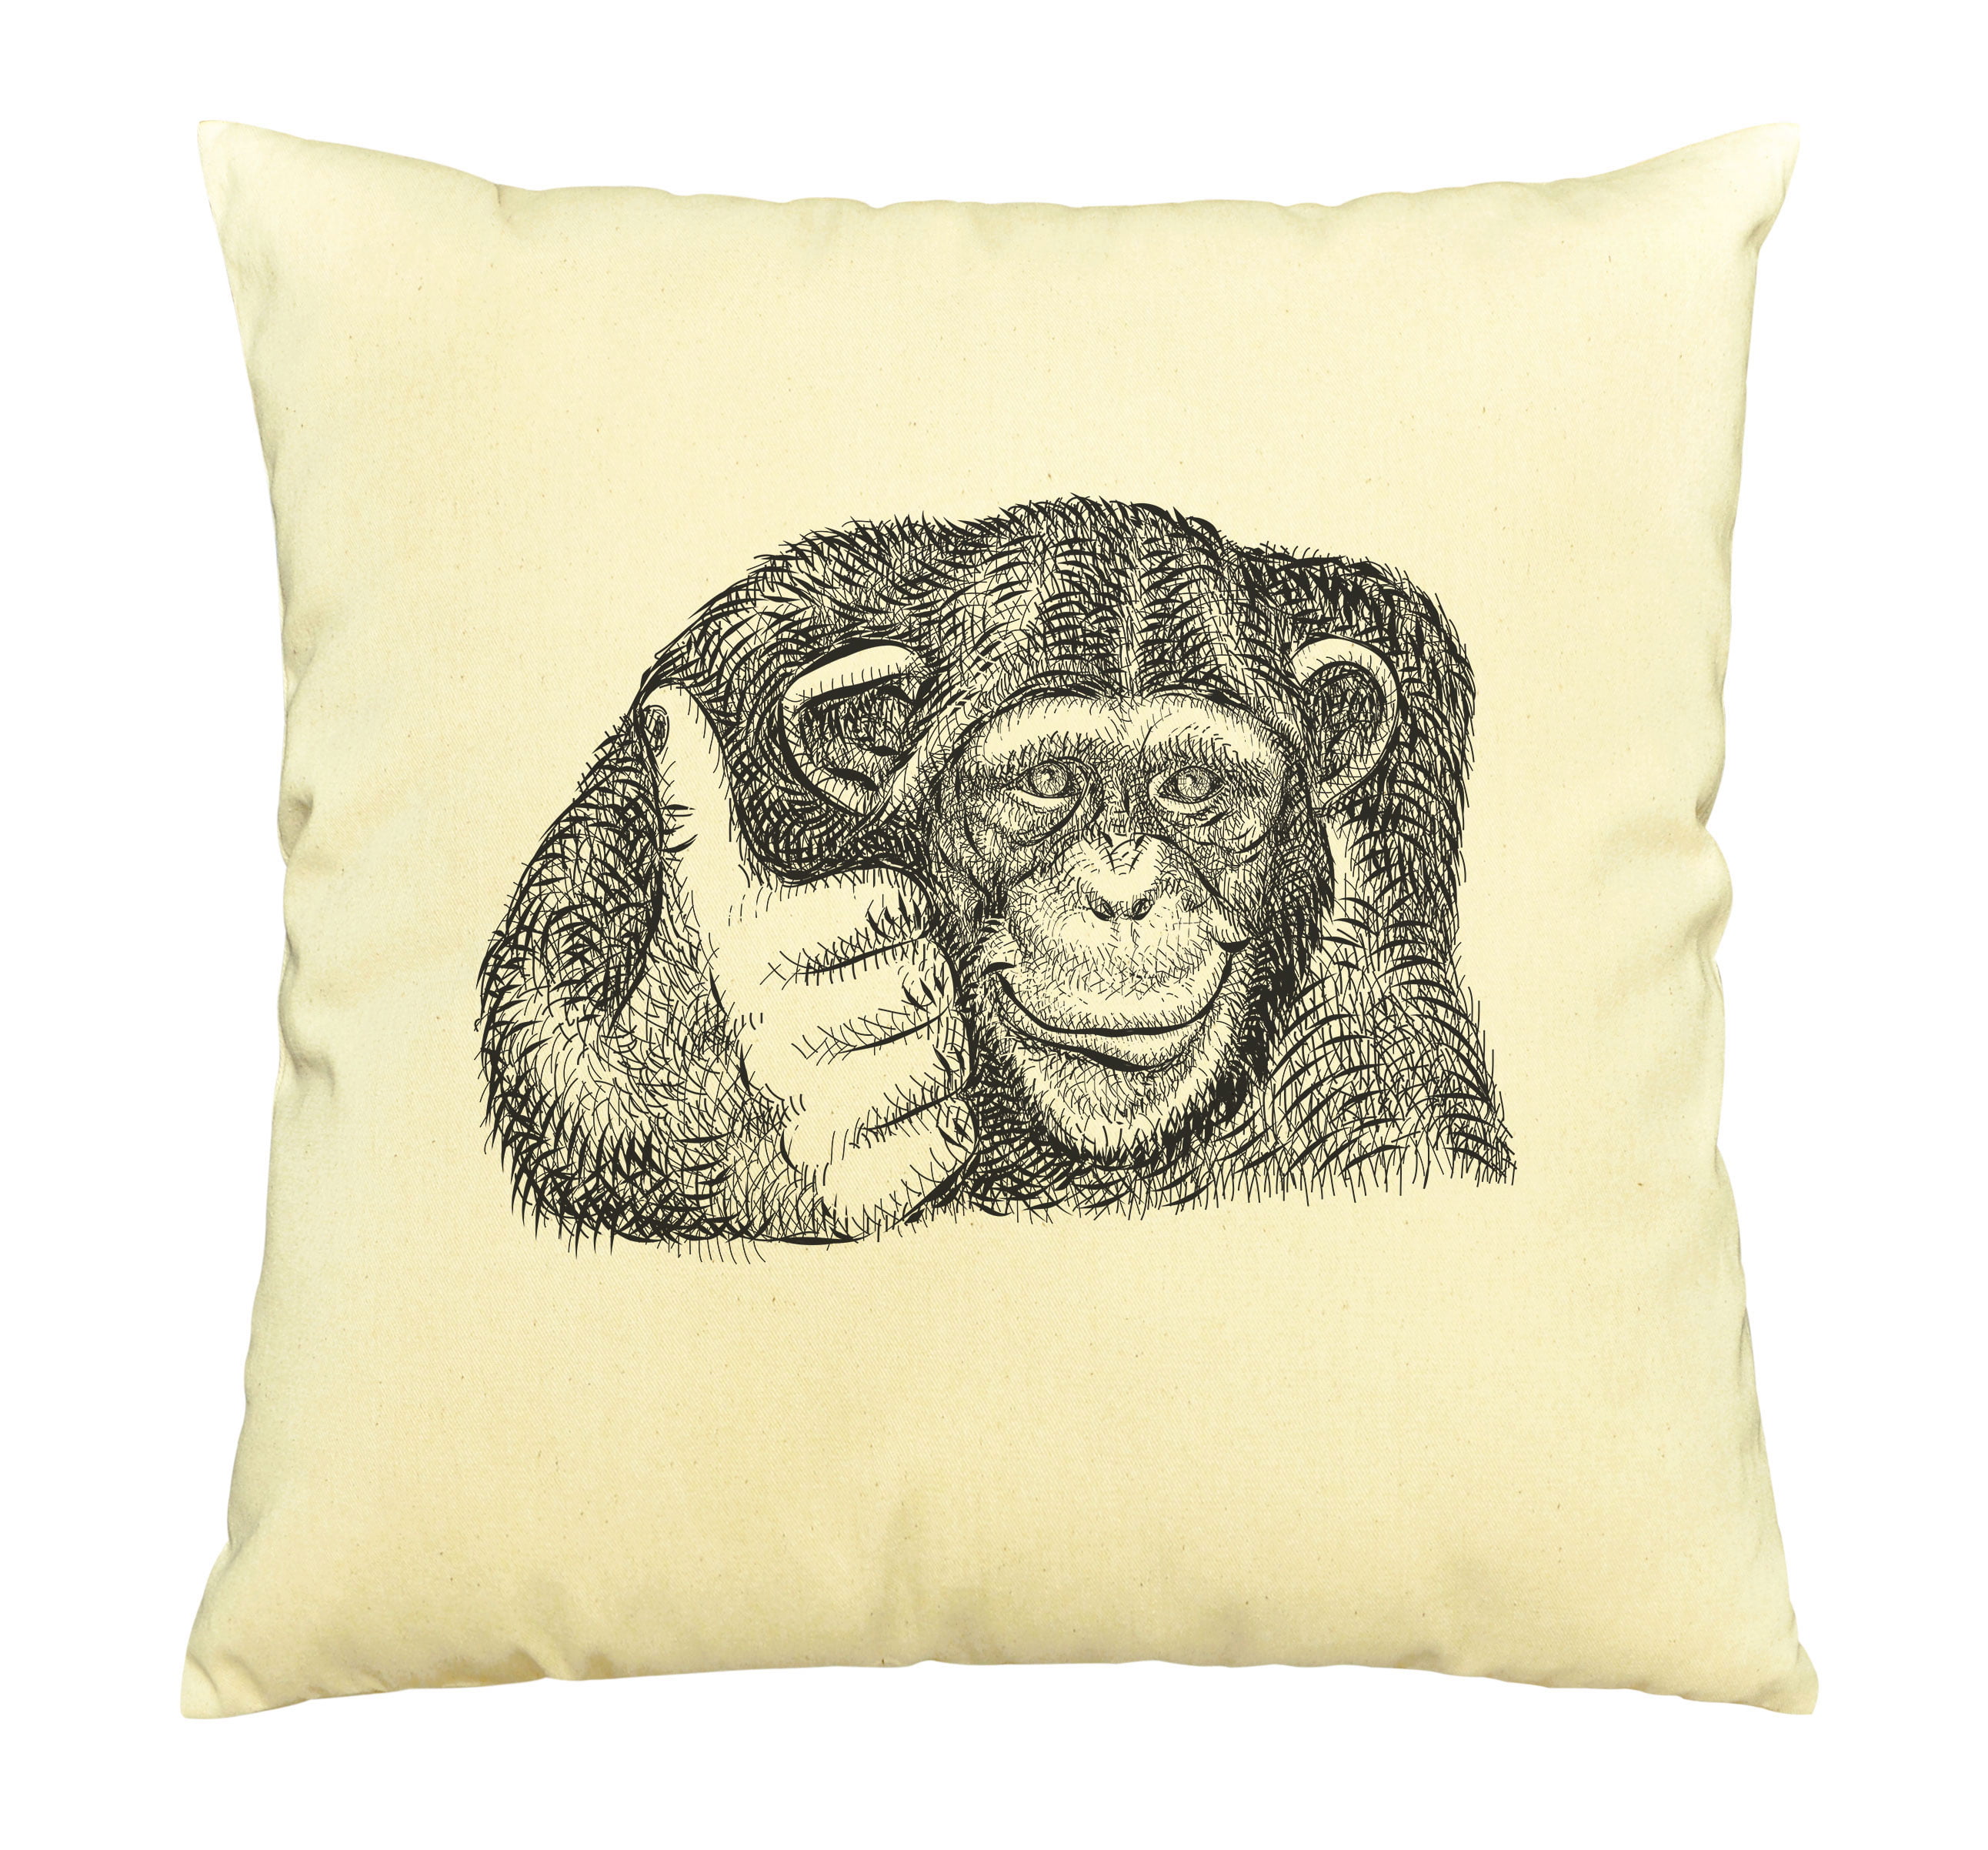 DESIGNS Gorilla Pillow Cover Monkey Sitting and Thoughtful Look A Glass of  Beer Pillow Cases for Home Sofa Couch - AliExpress